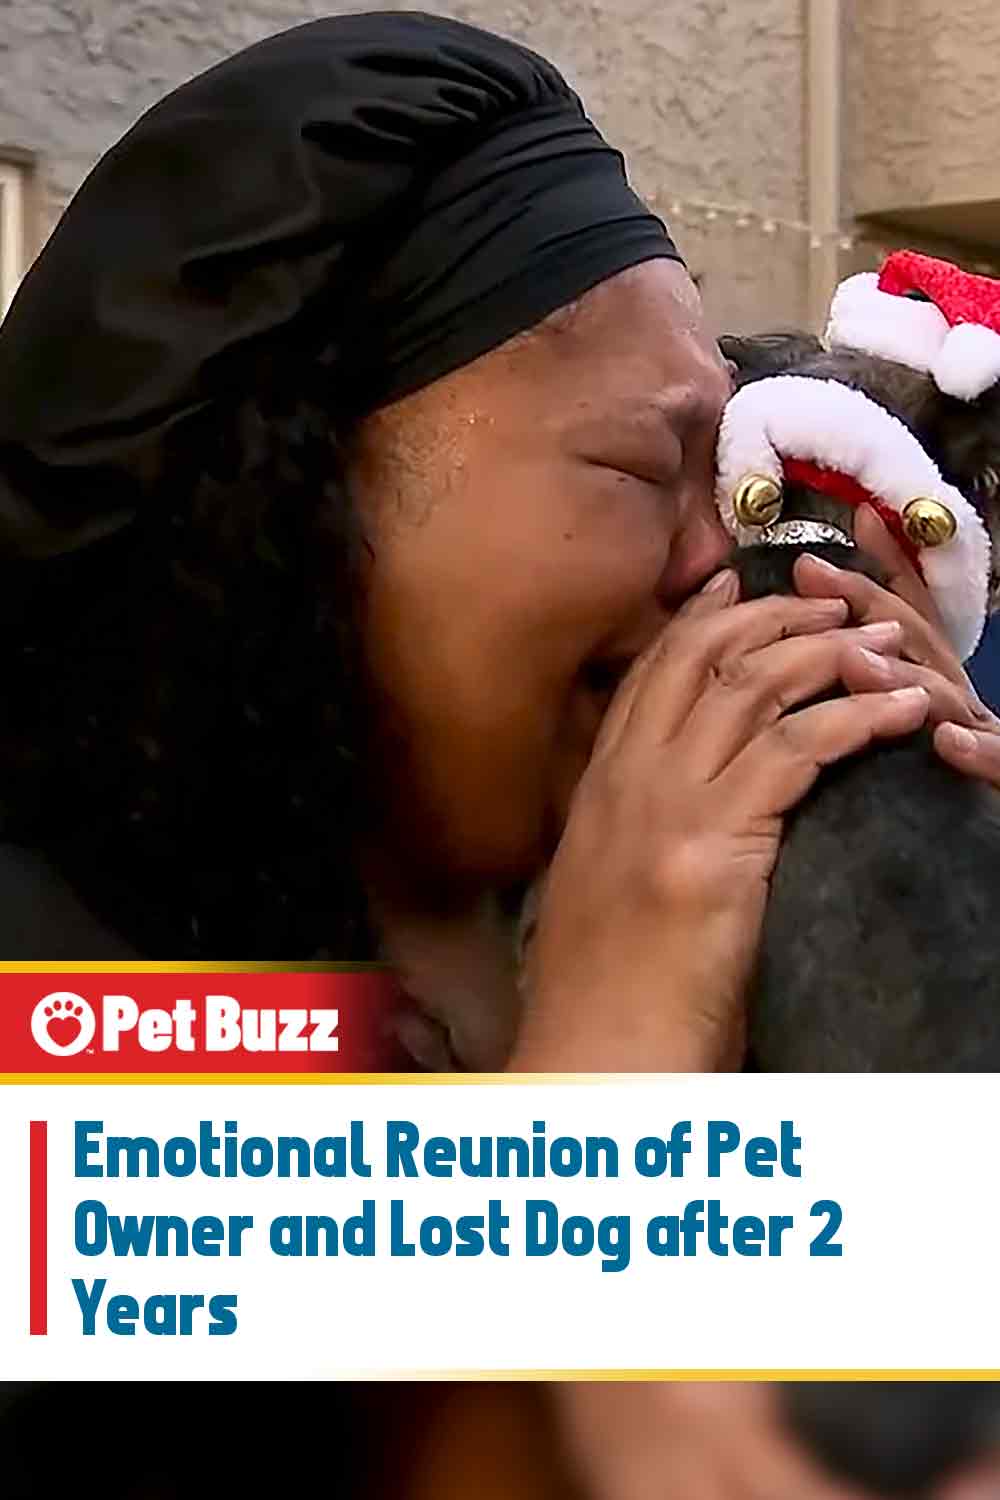 Emotional Reunion of Pet Owner and Lost Dog after 2 Years